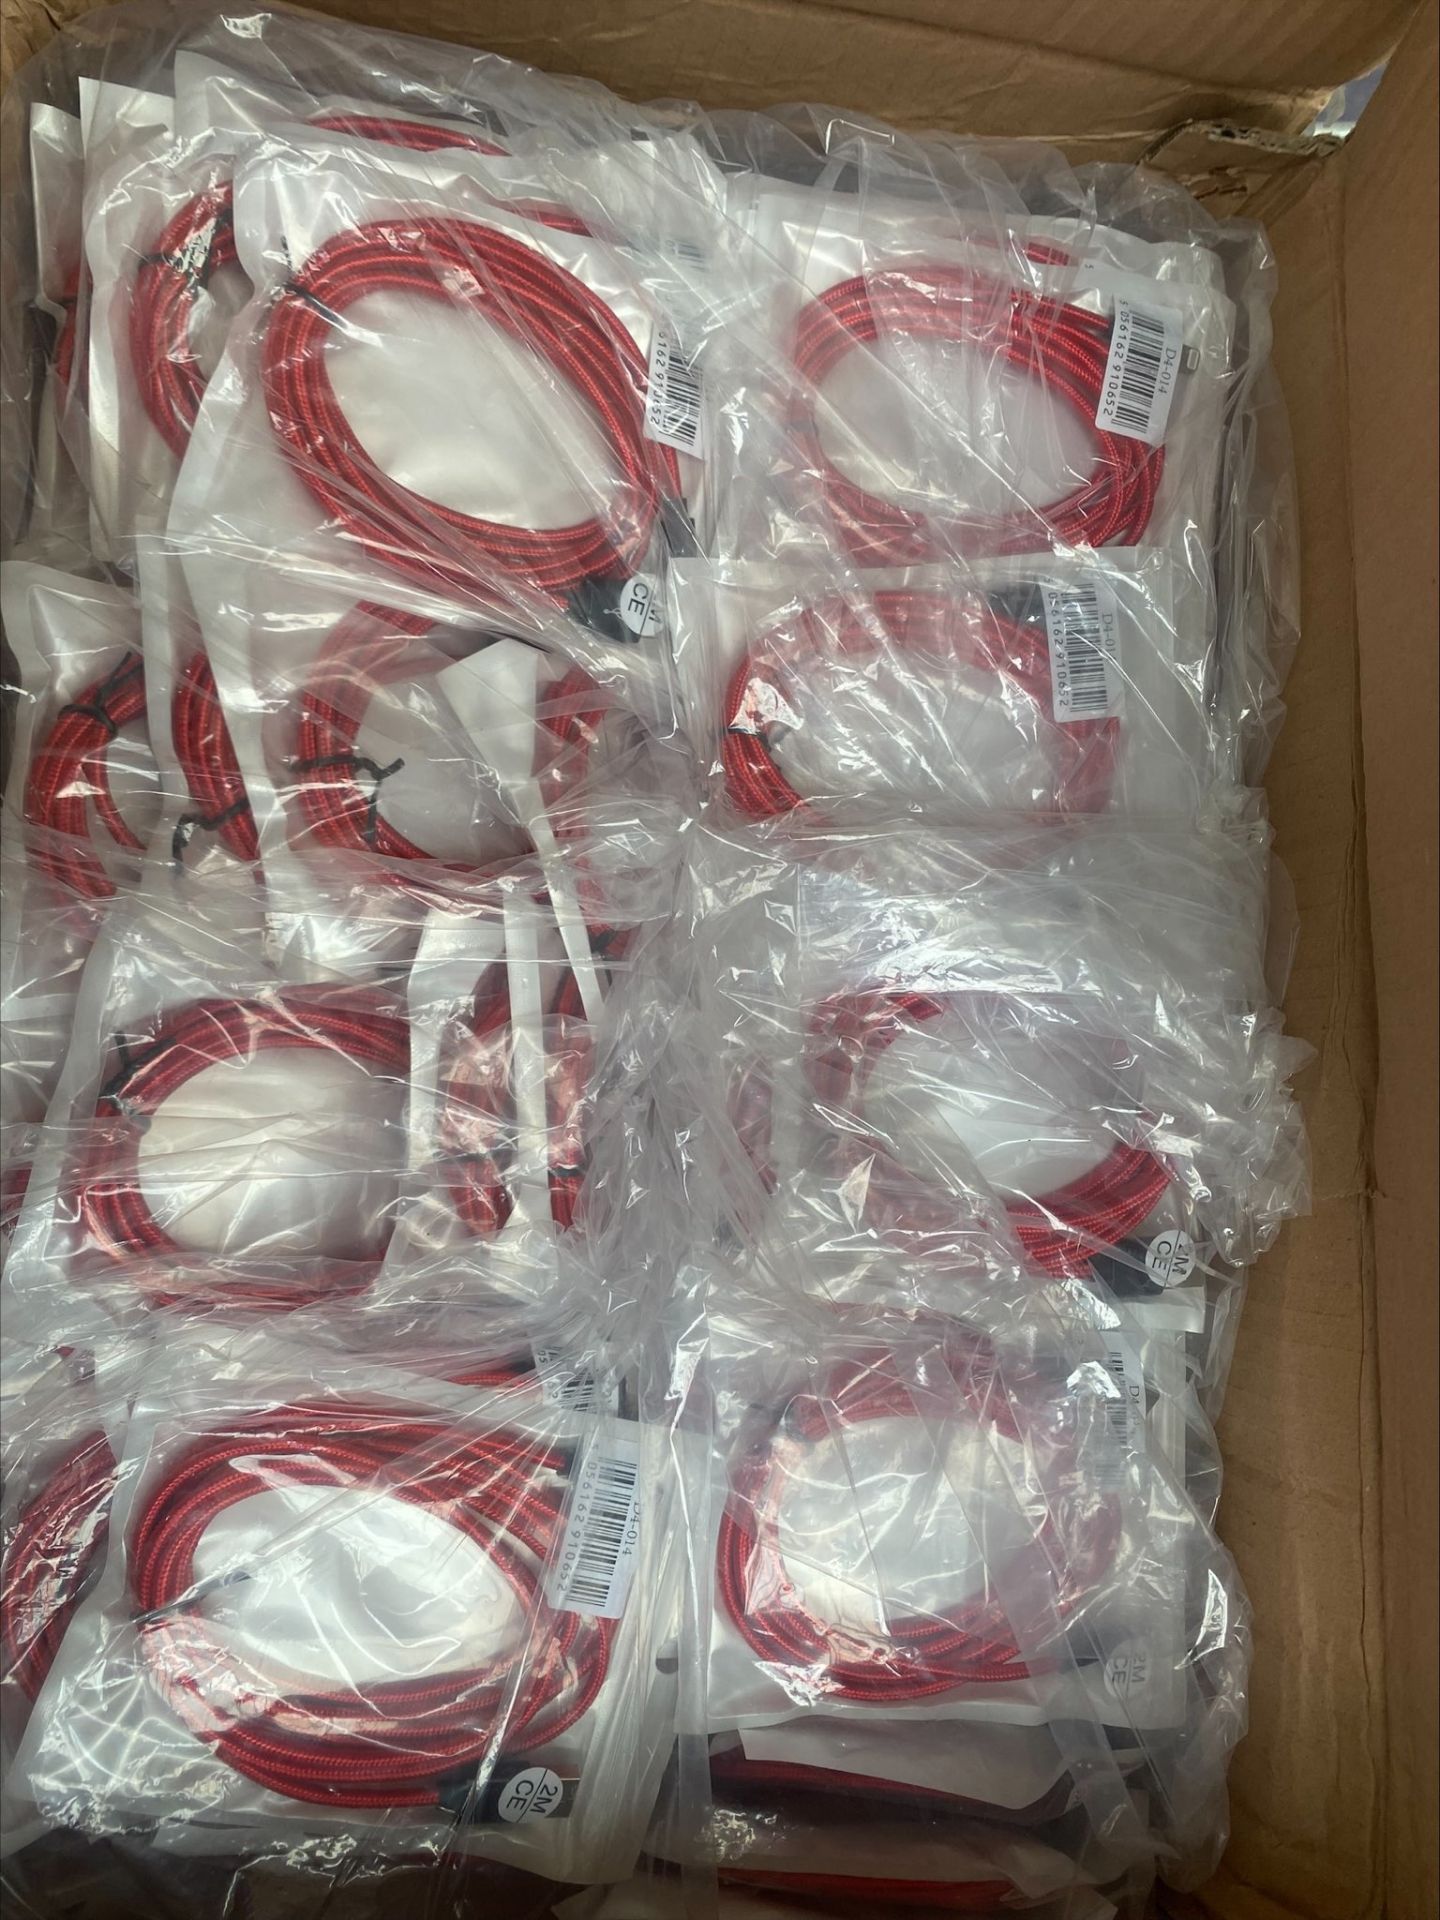 Joblot 50K Units iPhone, Samsung, Airpod, Apple Watch, Charging Cables, Phone Covers Accessories - Image 34 of 52